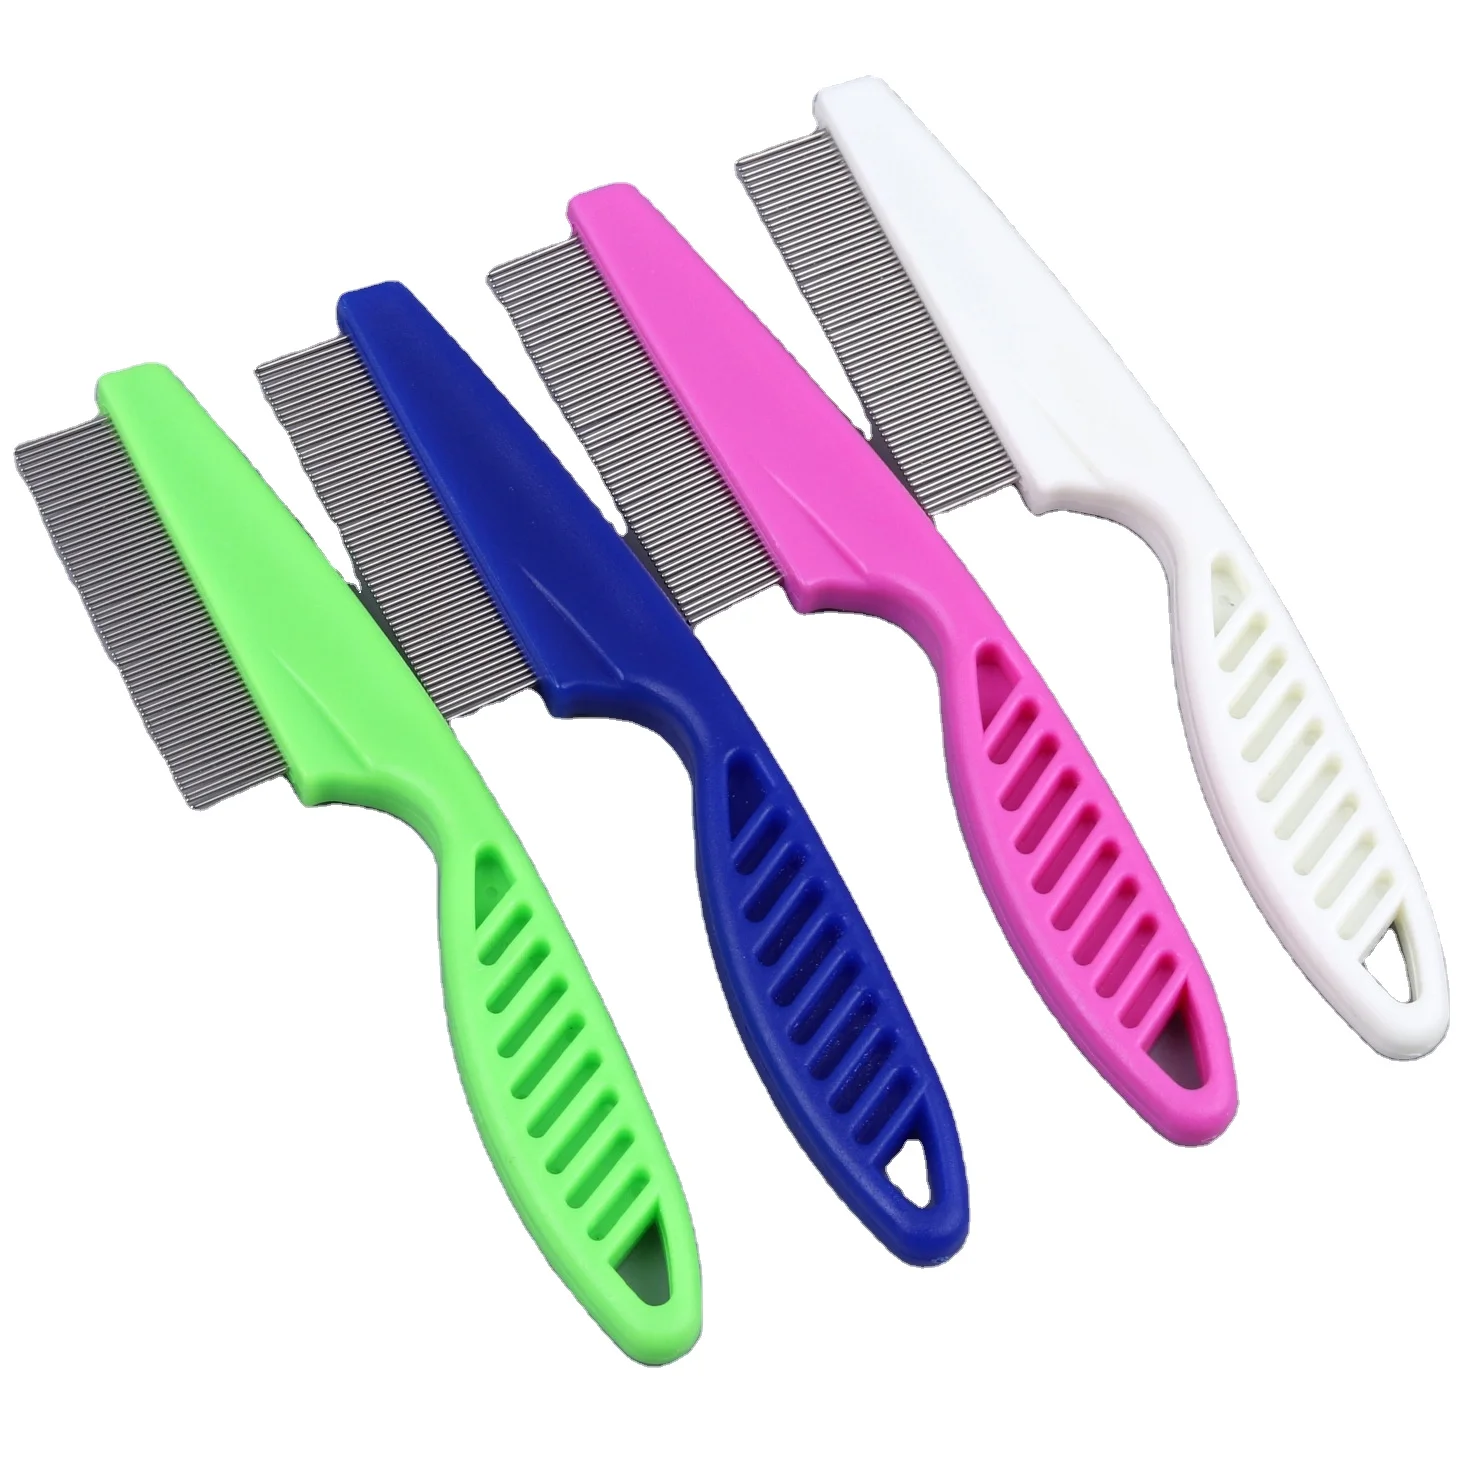 

Amazon Hot Sale Pet Flea Comb Stainless Steel Pet Grooming Massage Dog Dematting Comb Cat Lice Removal Comb, As picture